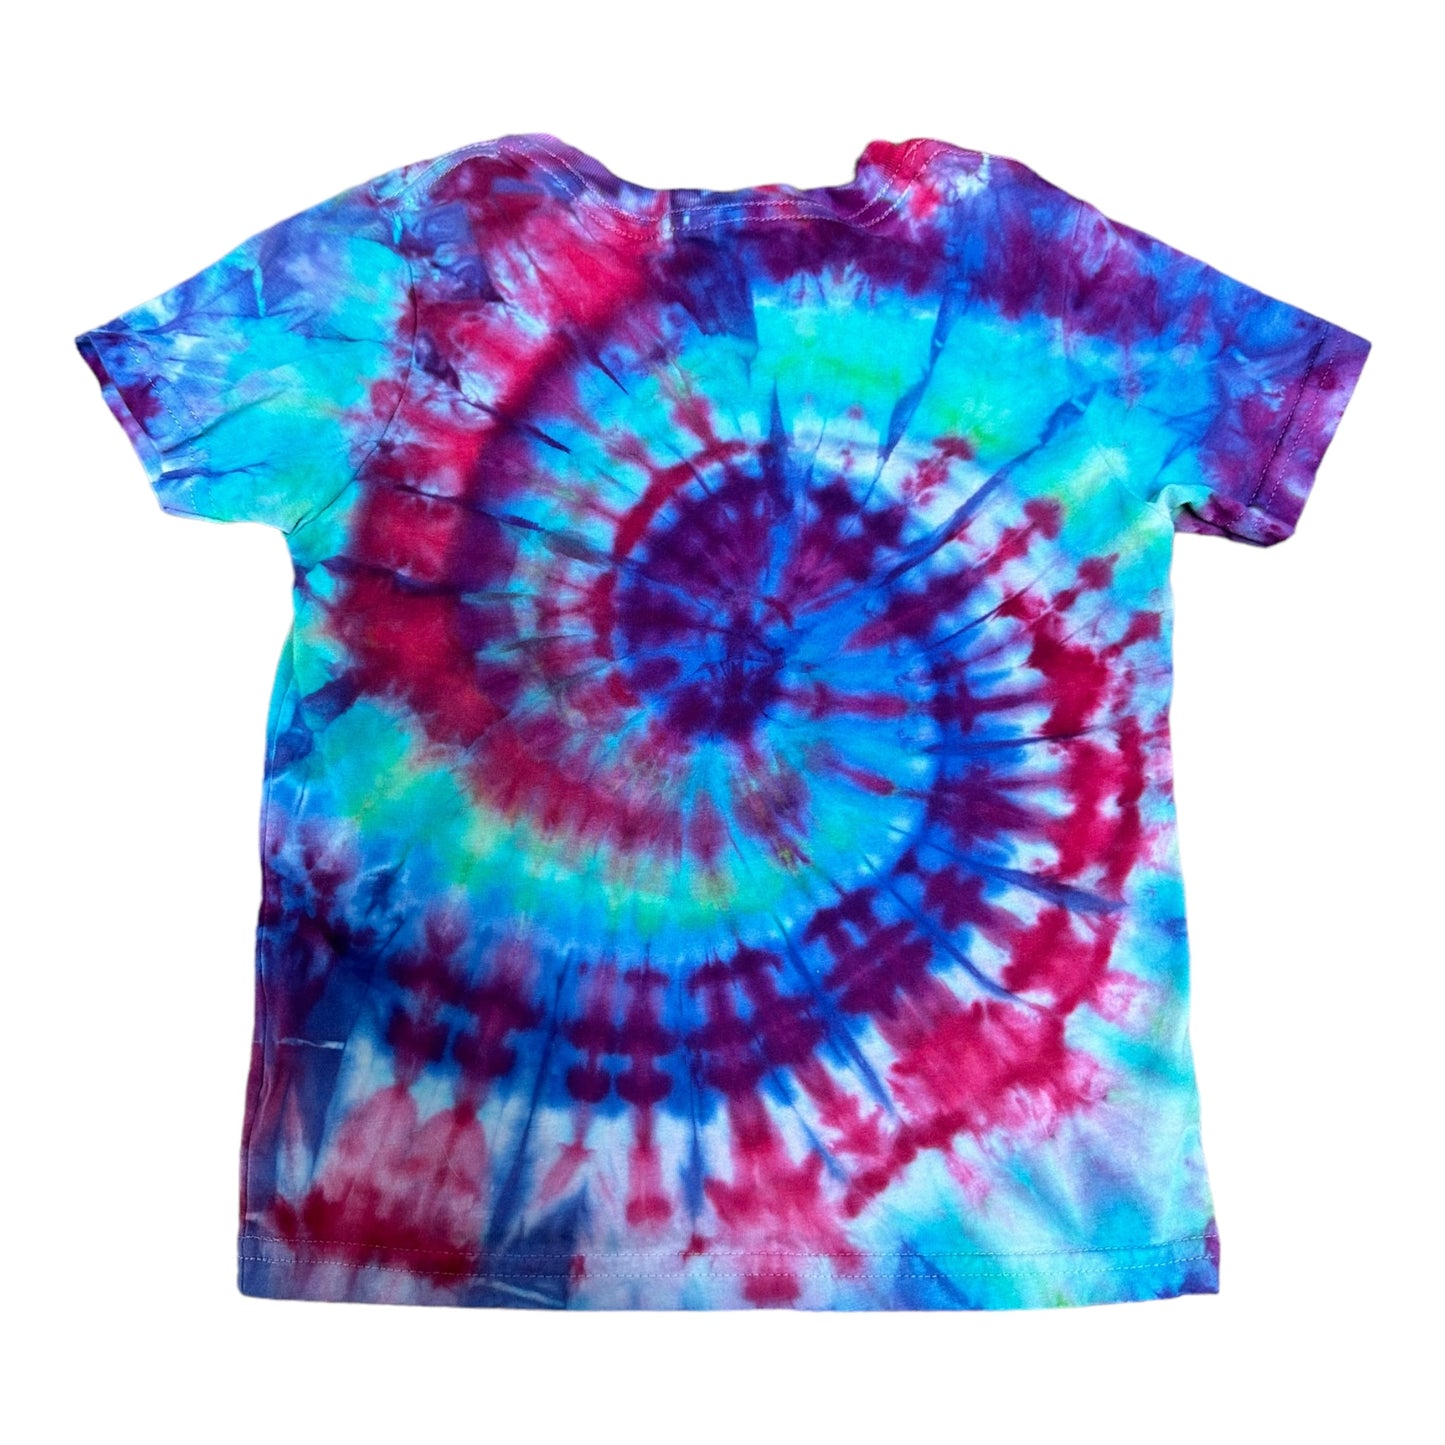 Toddler 4T Blue Green Pink and Purple Spiral Ice Dye Tie Dye Shirt